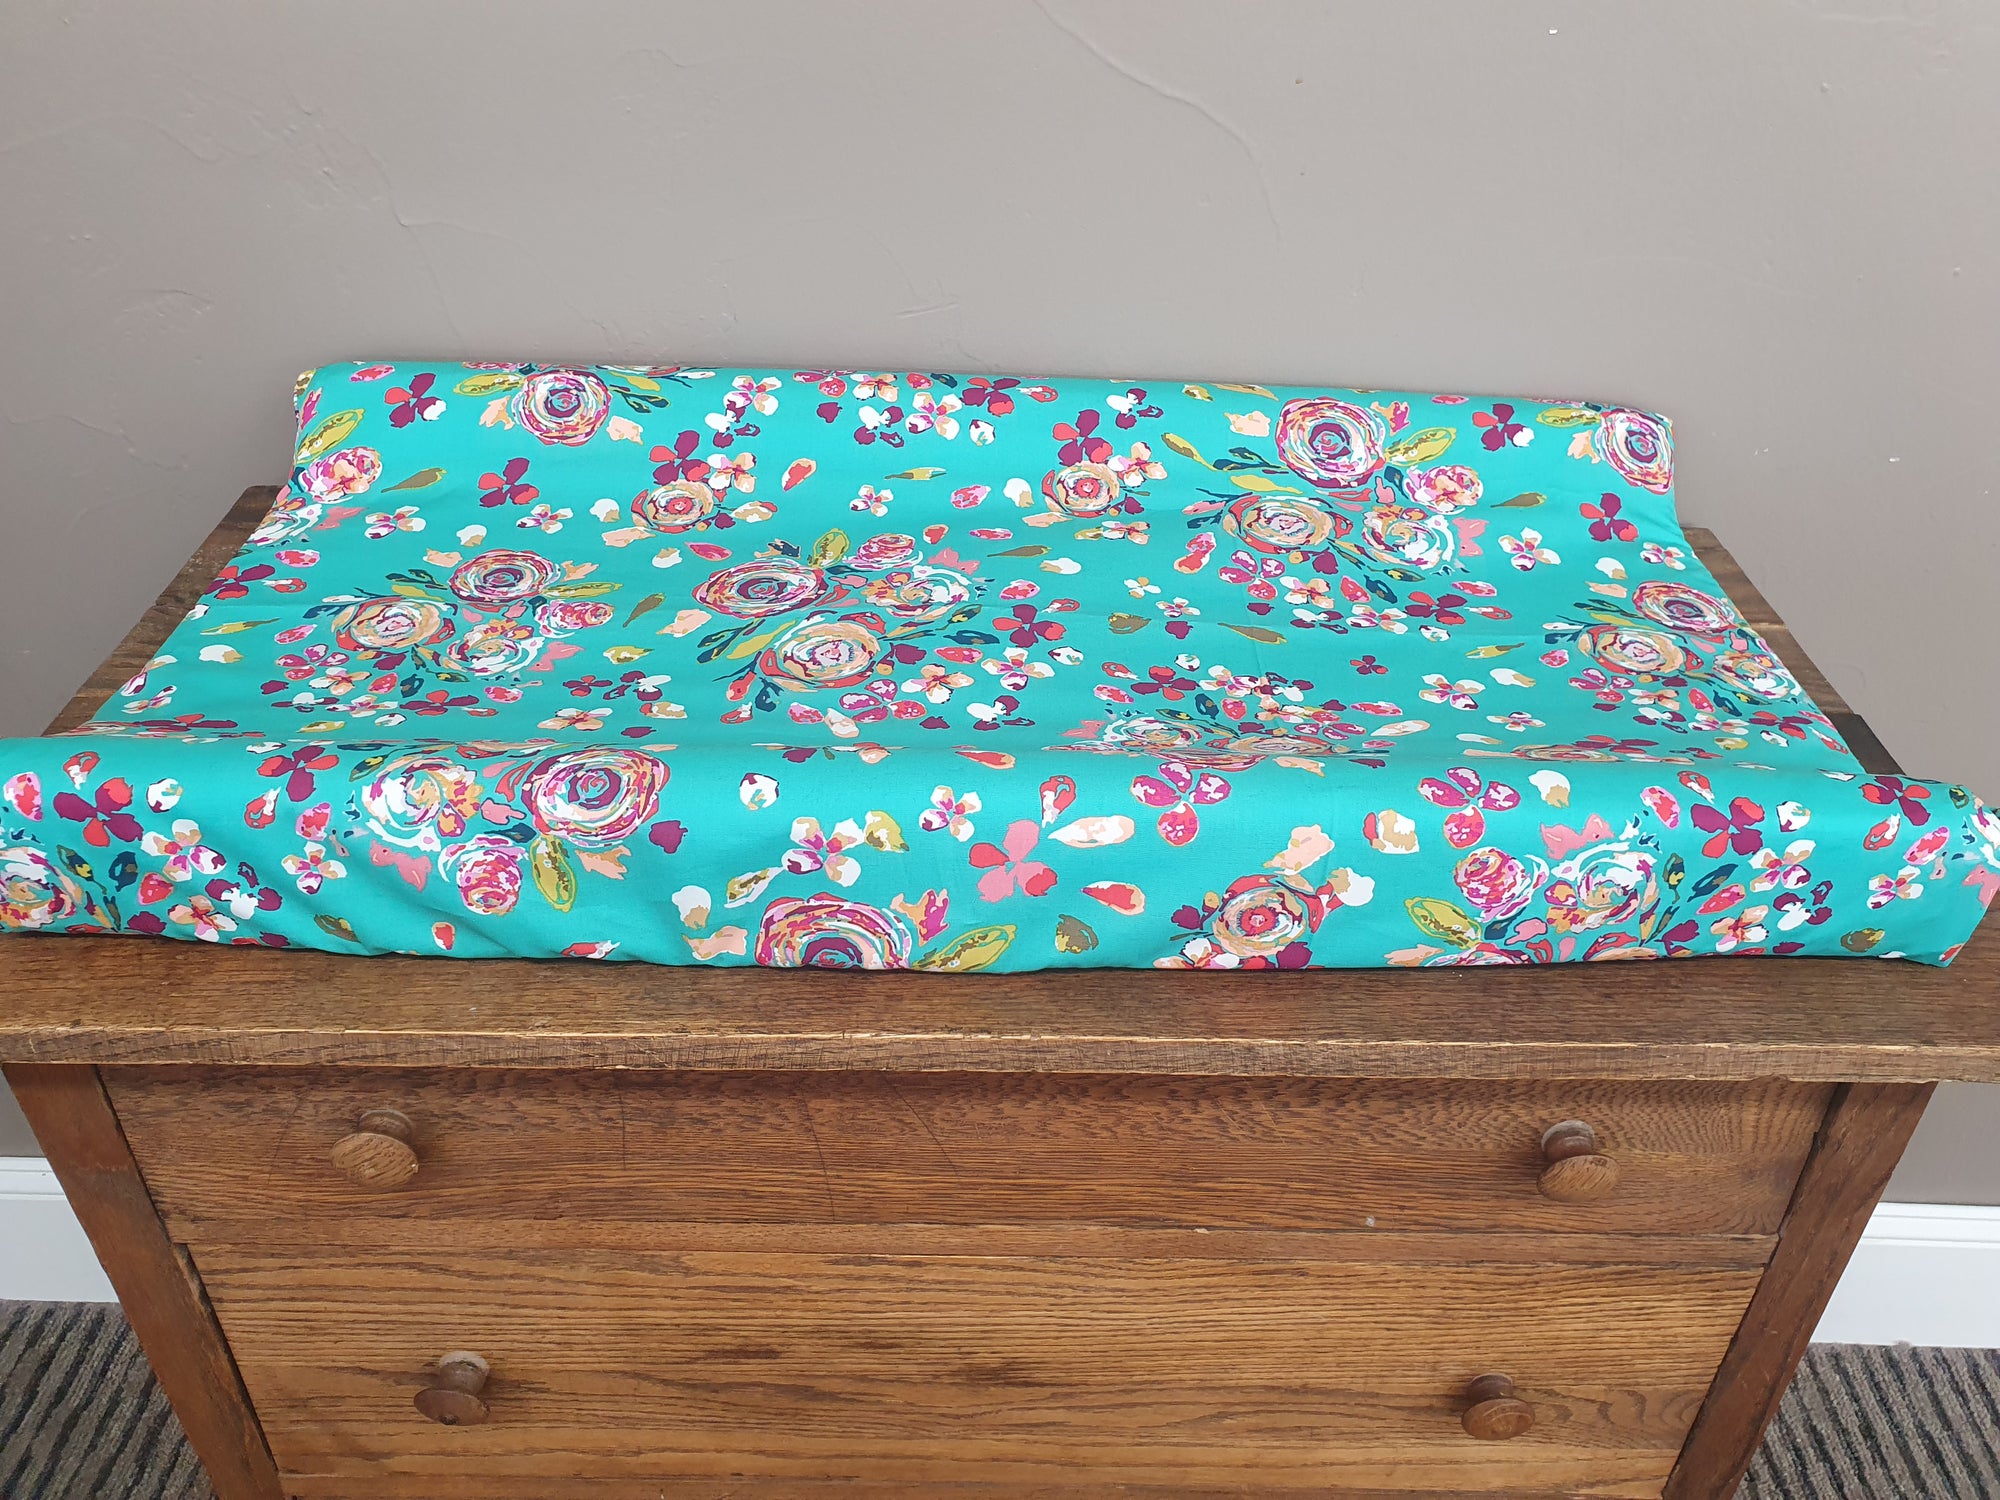 Changing Pad Cover - Teal Floral Cover - DBC Baby Bedding Co 